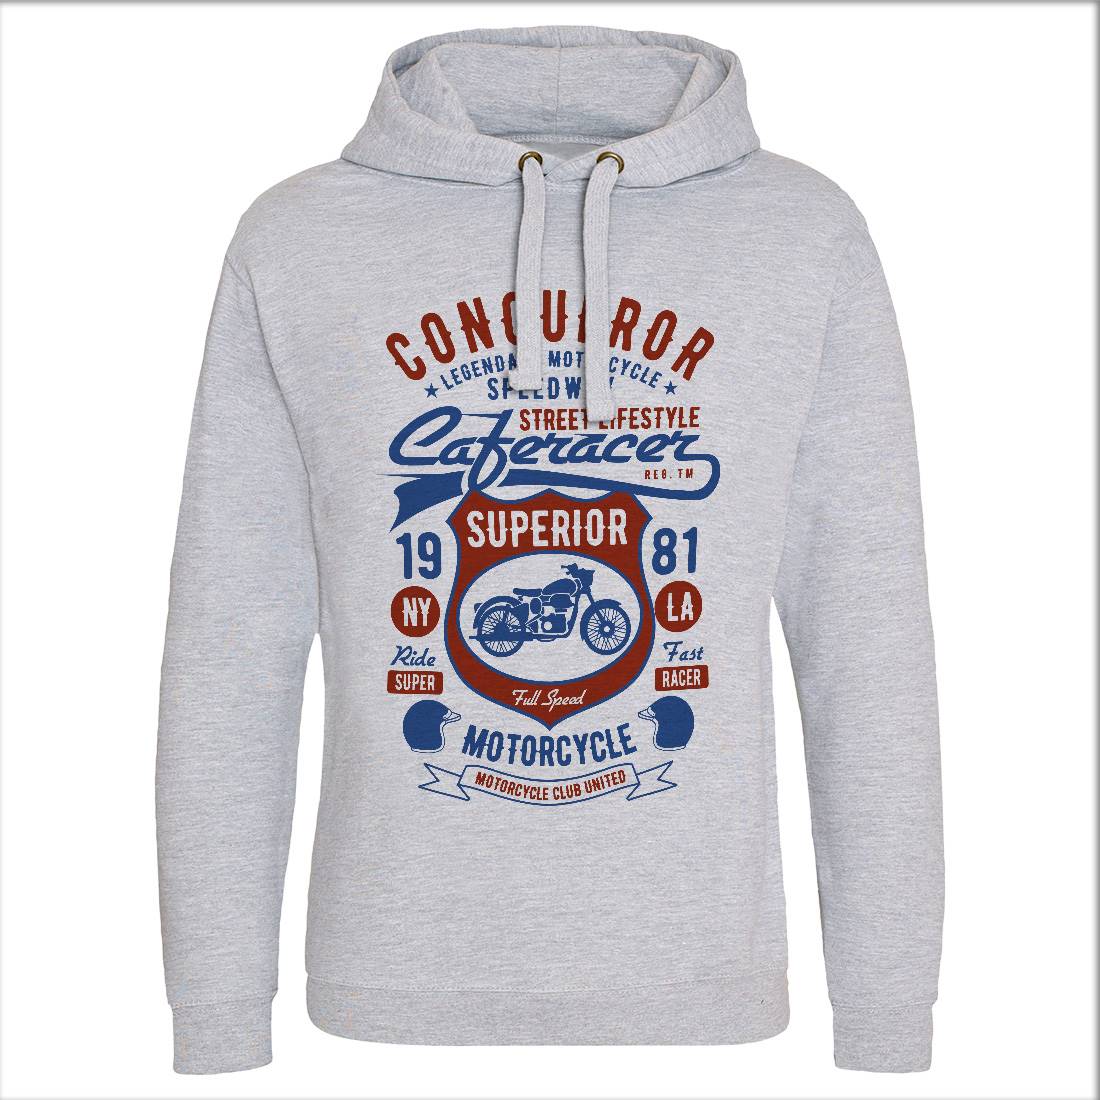 Conqueror Speedway Mens Hoodie Without Pocket Motorcycles B398